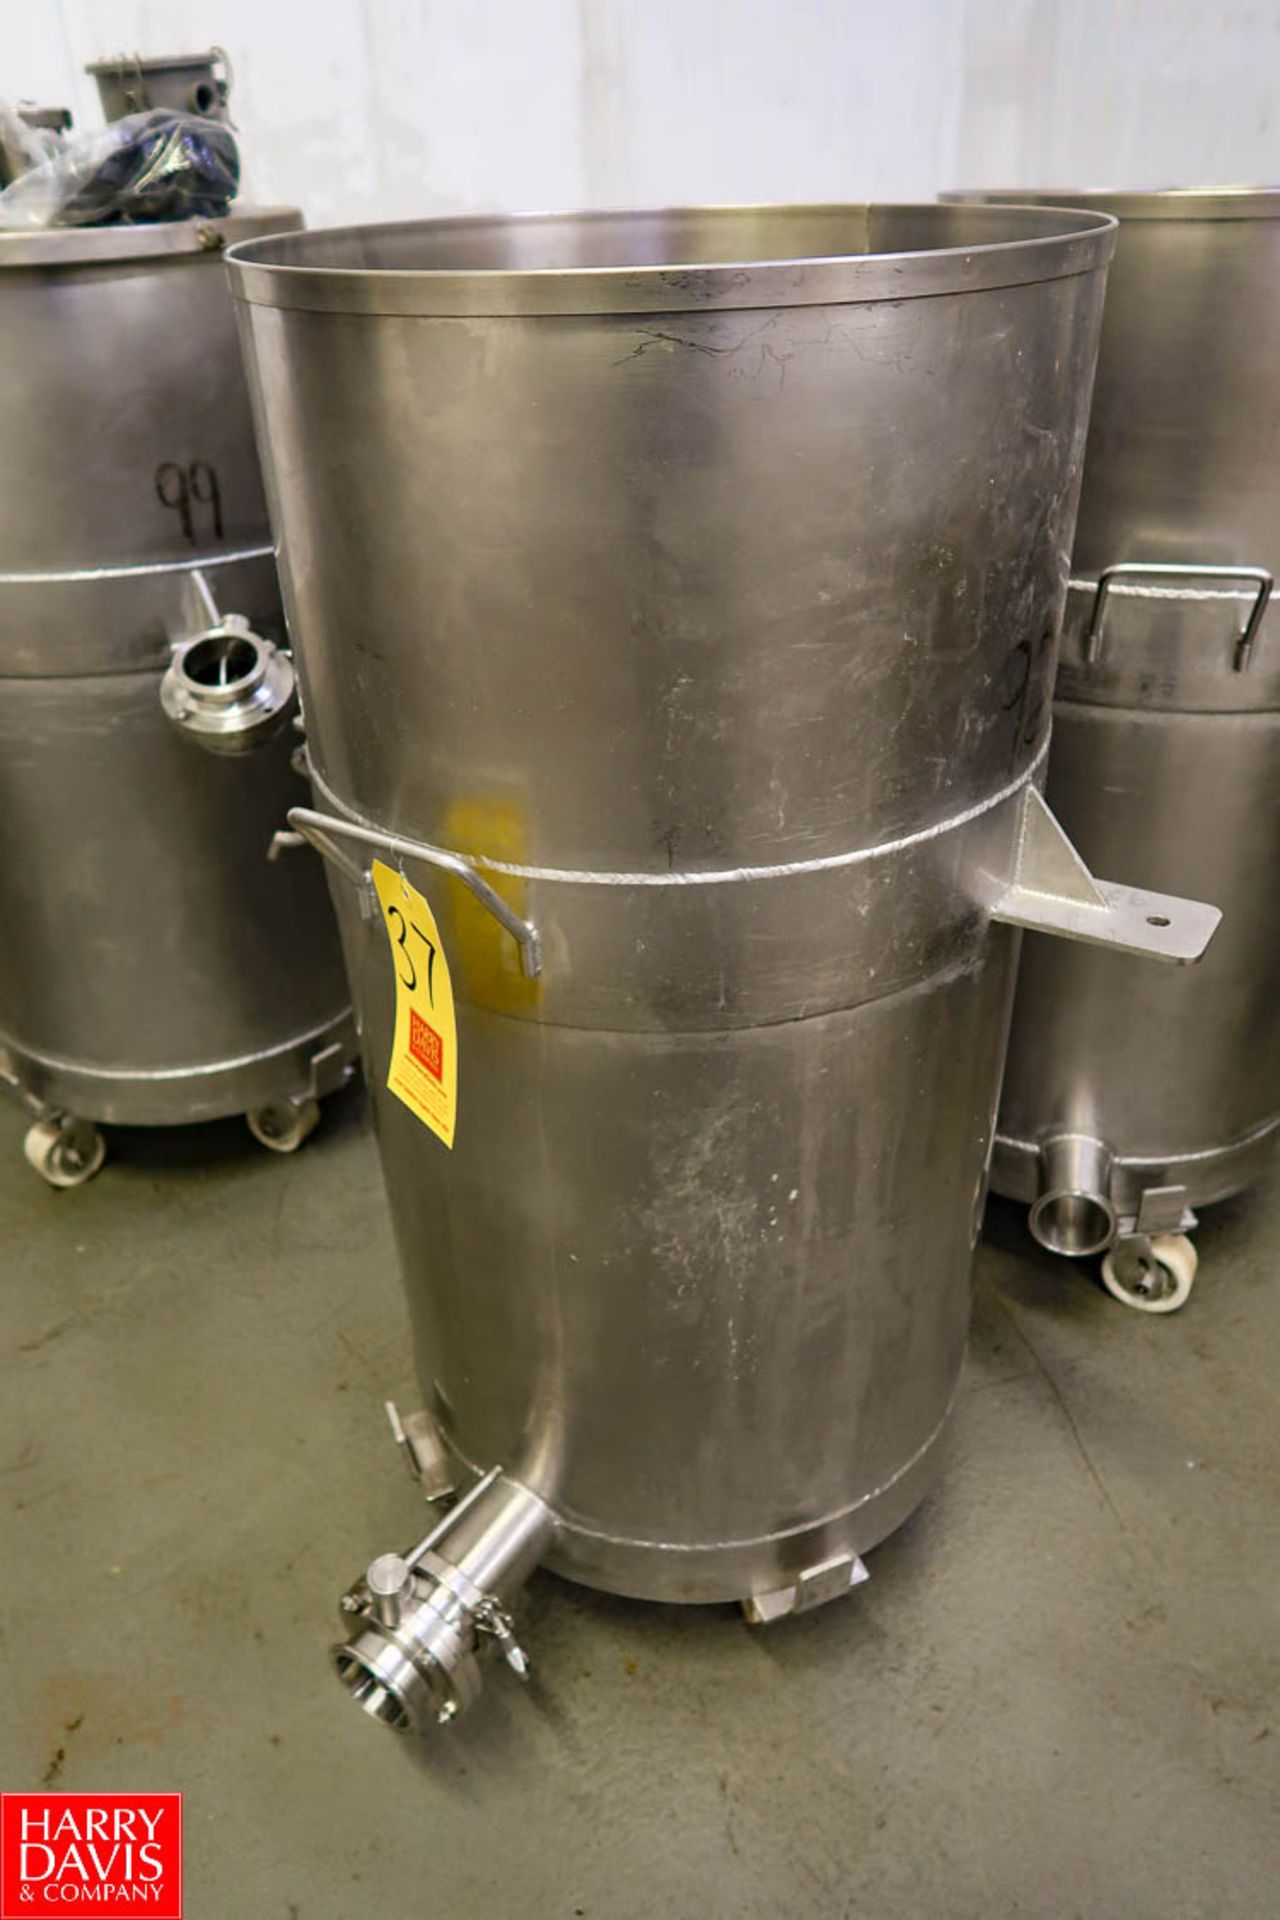 S/S Drums Approx. 50 Gallon/190 Liter Capacity, 3" Diameter Outlets, with Manual Butterfly Valves. - Image 2 of 3